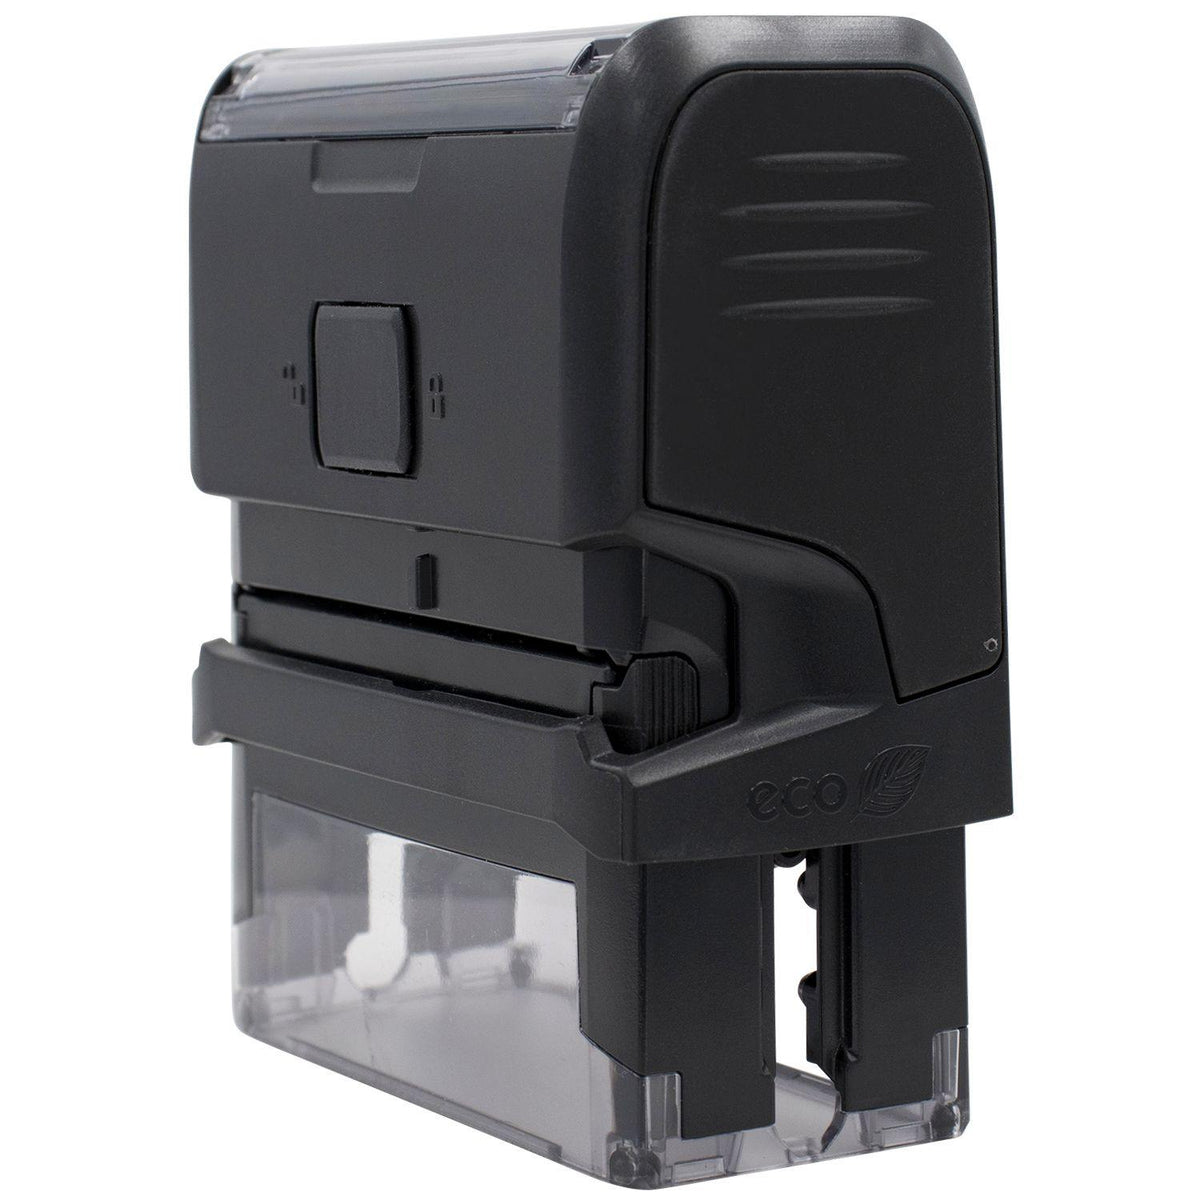 Self Inking Declaration Stamp - Engineer Seal Stamps - Brand_Trodat, Impression Size_Small, Stamp Type_Self-Inking Stamp, Type of Use_Legal